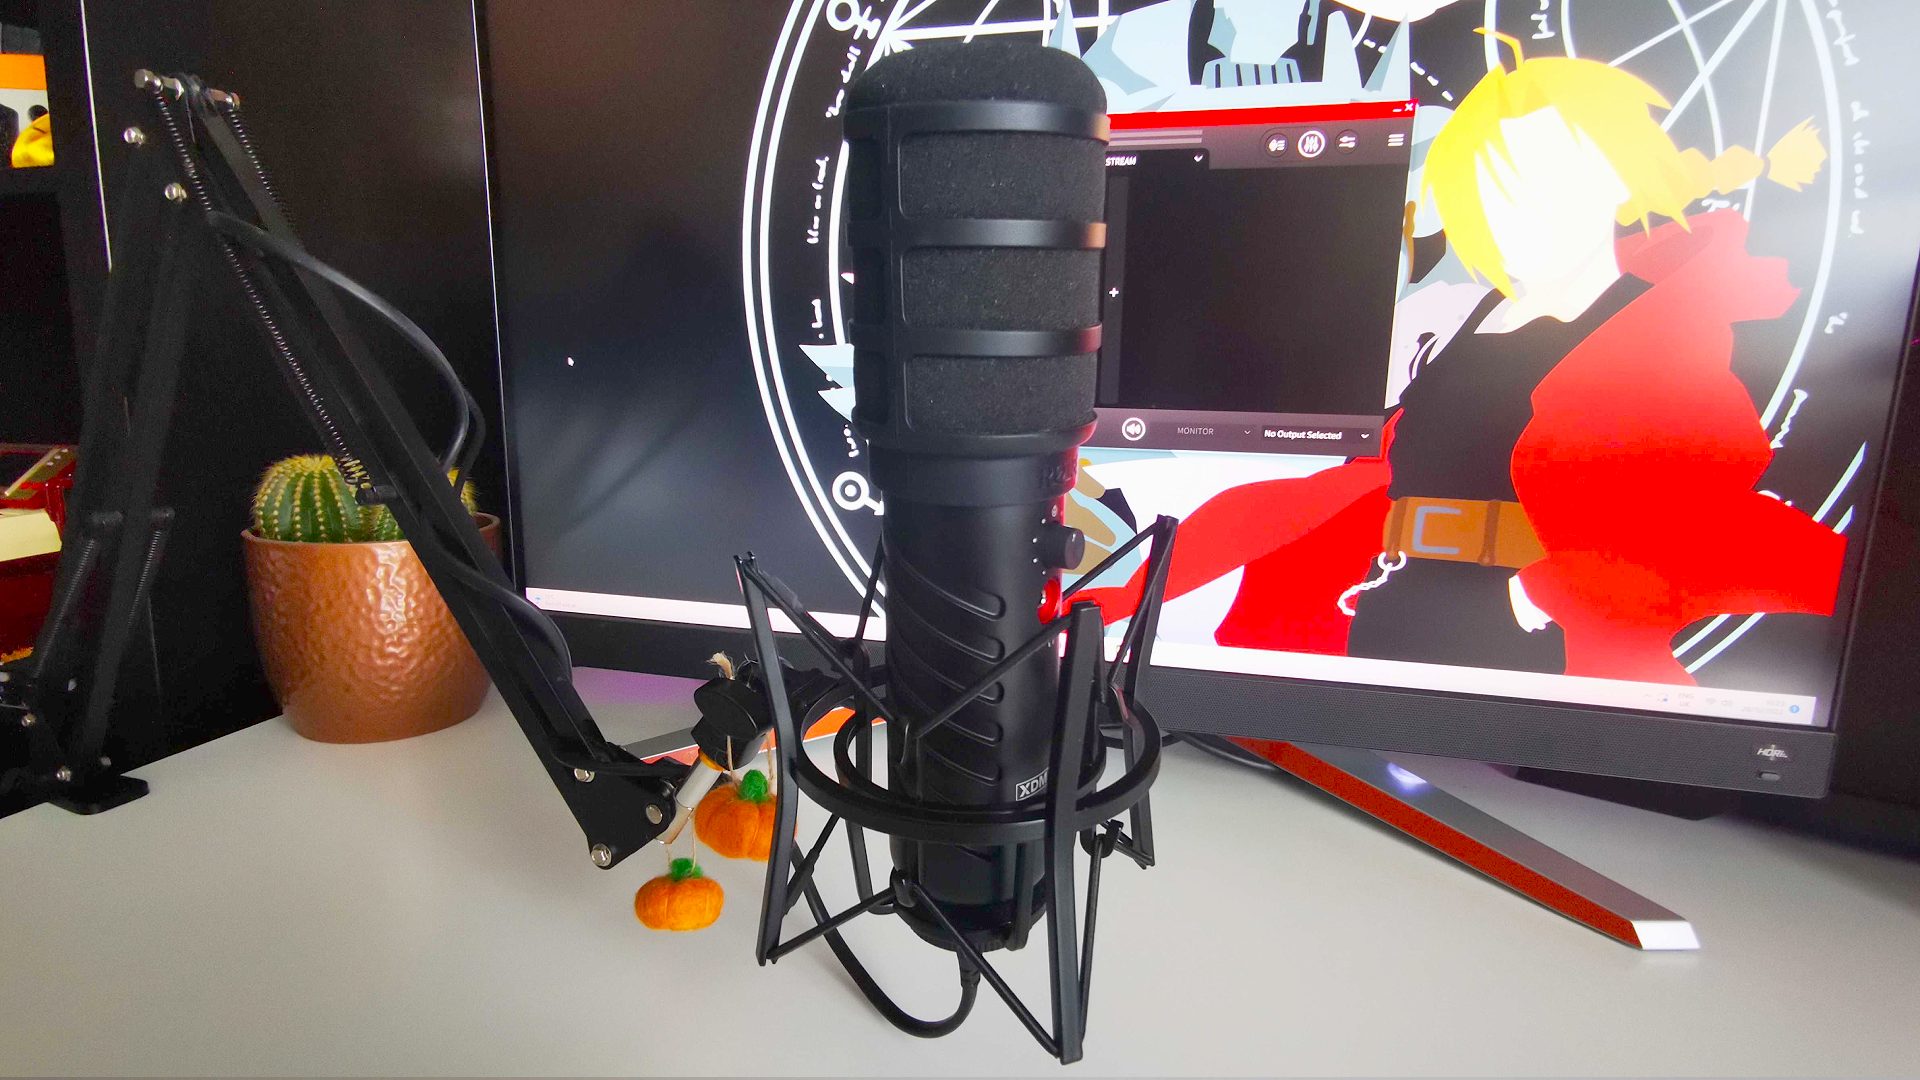 Rode X XDM-100 gaming mic on boom arm with monitor in backdrop